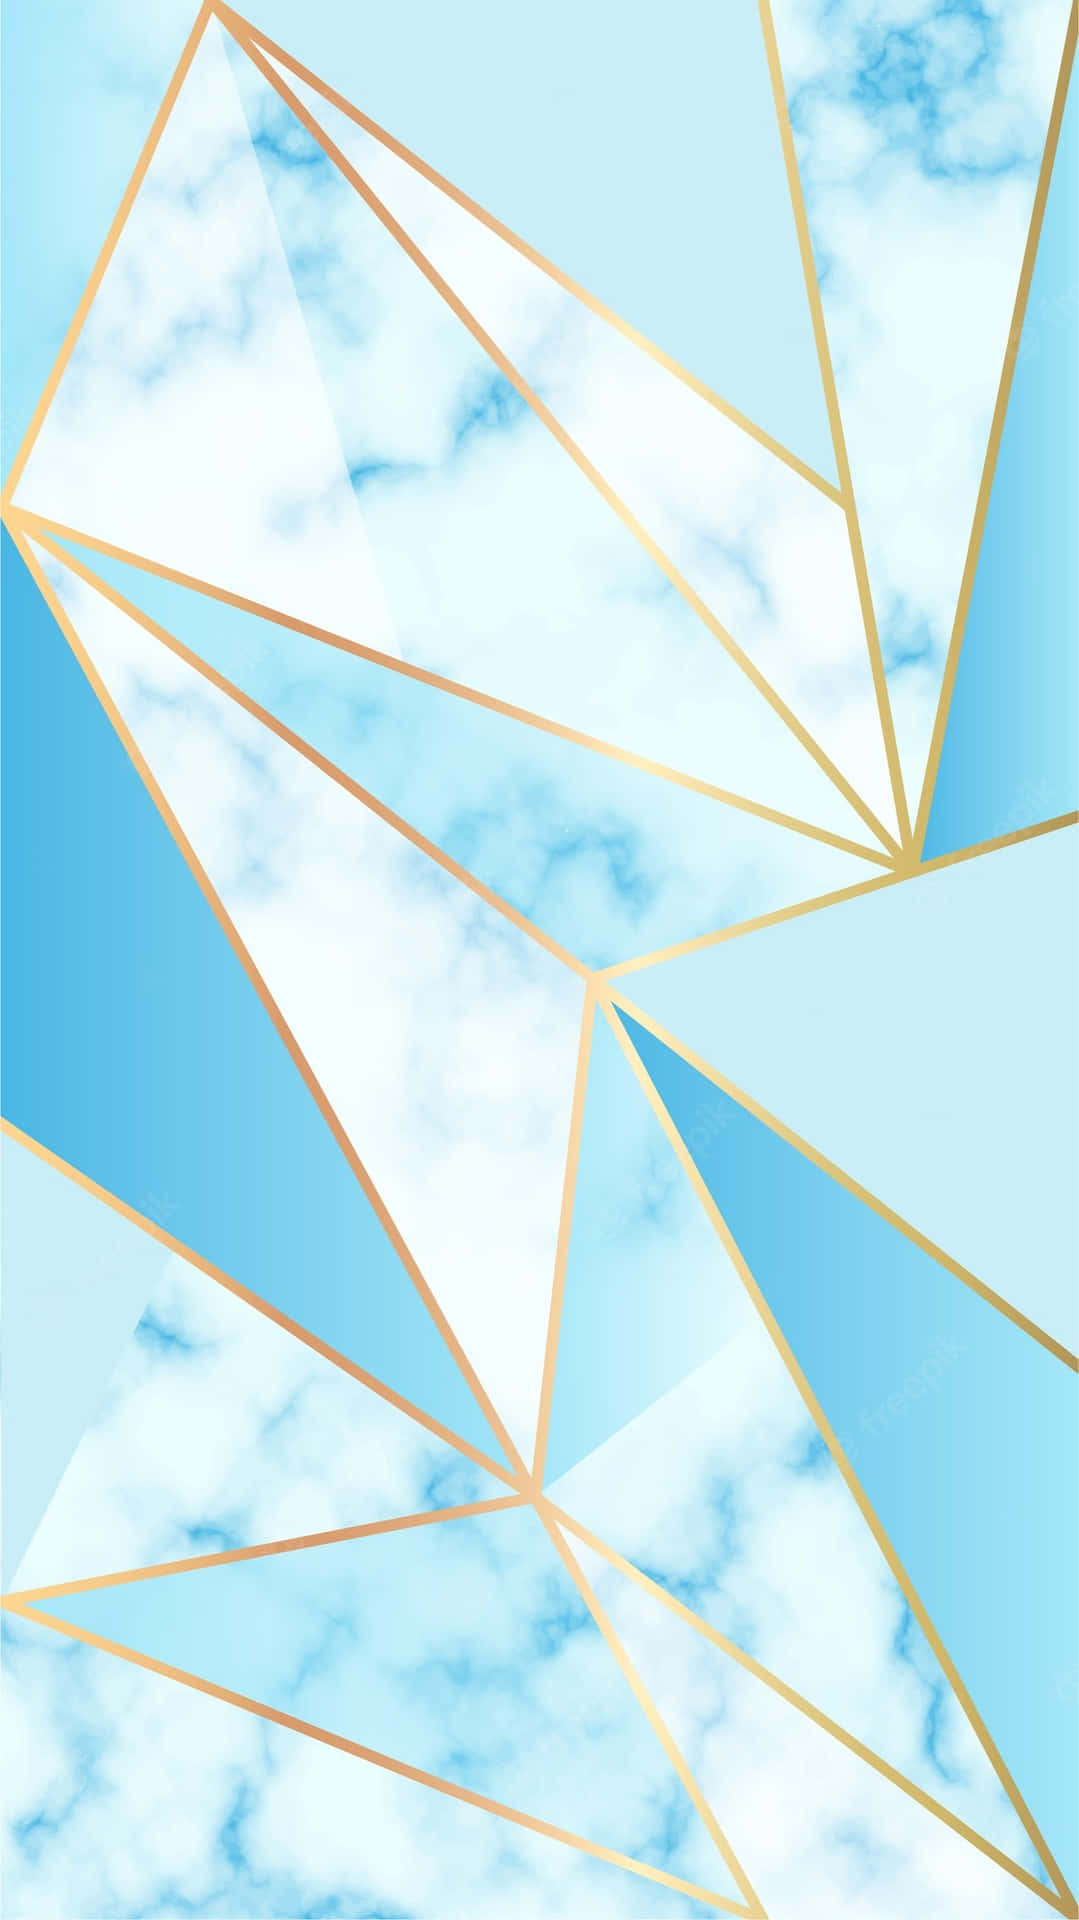 Abstract design featuring bright blue geometric shapes Wallpaper